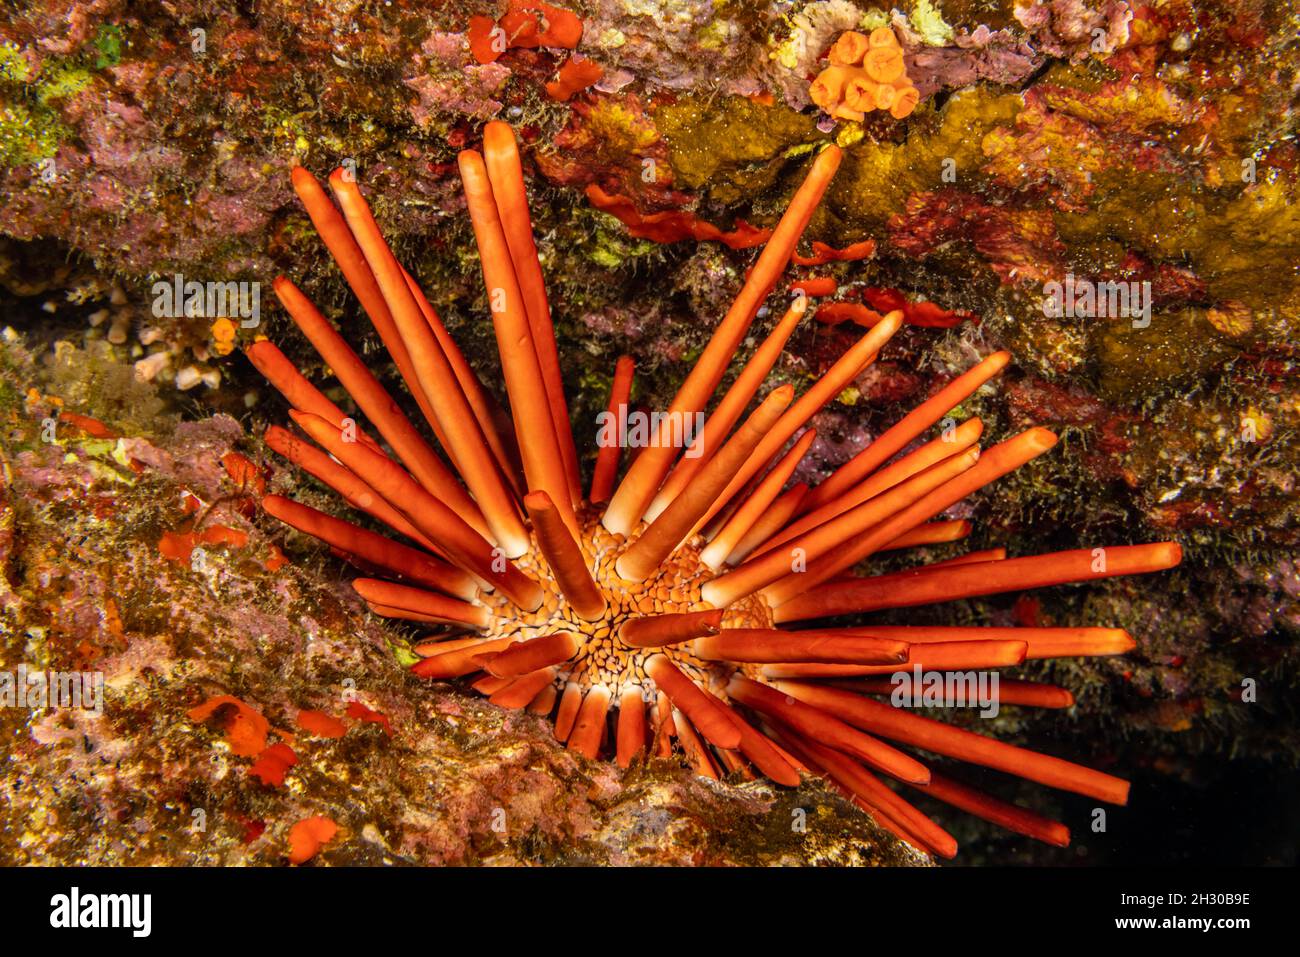 The slate pencil sea urchin, Heterocentrotus mammillatus, locks itself into crevices in the reef using its substantial spines, Hawaii. Stock Photo